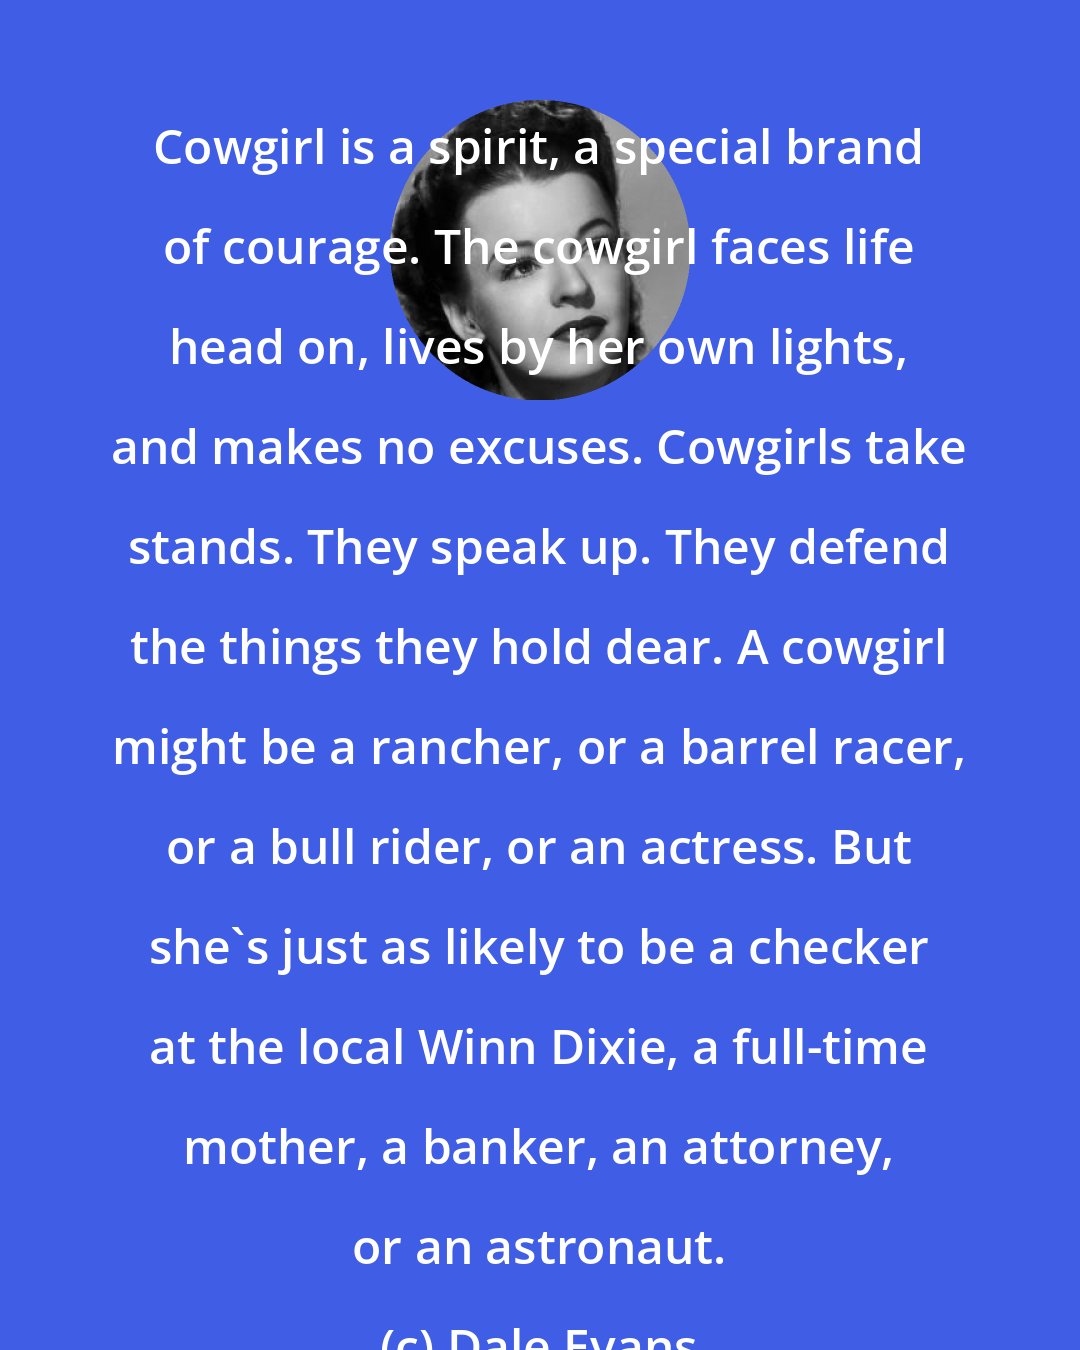 Dale Evans: Cowgirl is a spirit, a special brand of courage. The cowgirl faces life head on, lives by her own lights, and makes no excuses. Cowgirls take stands. They speak up. They defend the things they hold dear. A cowgirl might be a rancher, or a barrel racer, or a bull rider, or an actress. But she's just as likely to be a checker at the local Winn Dixie, a full-time mother, a banker, an attorney, or an astronaut.